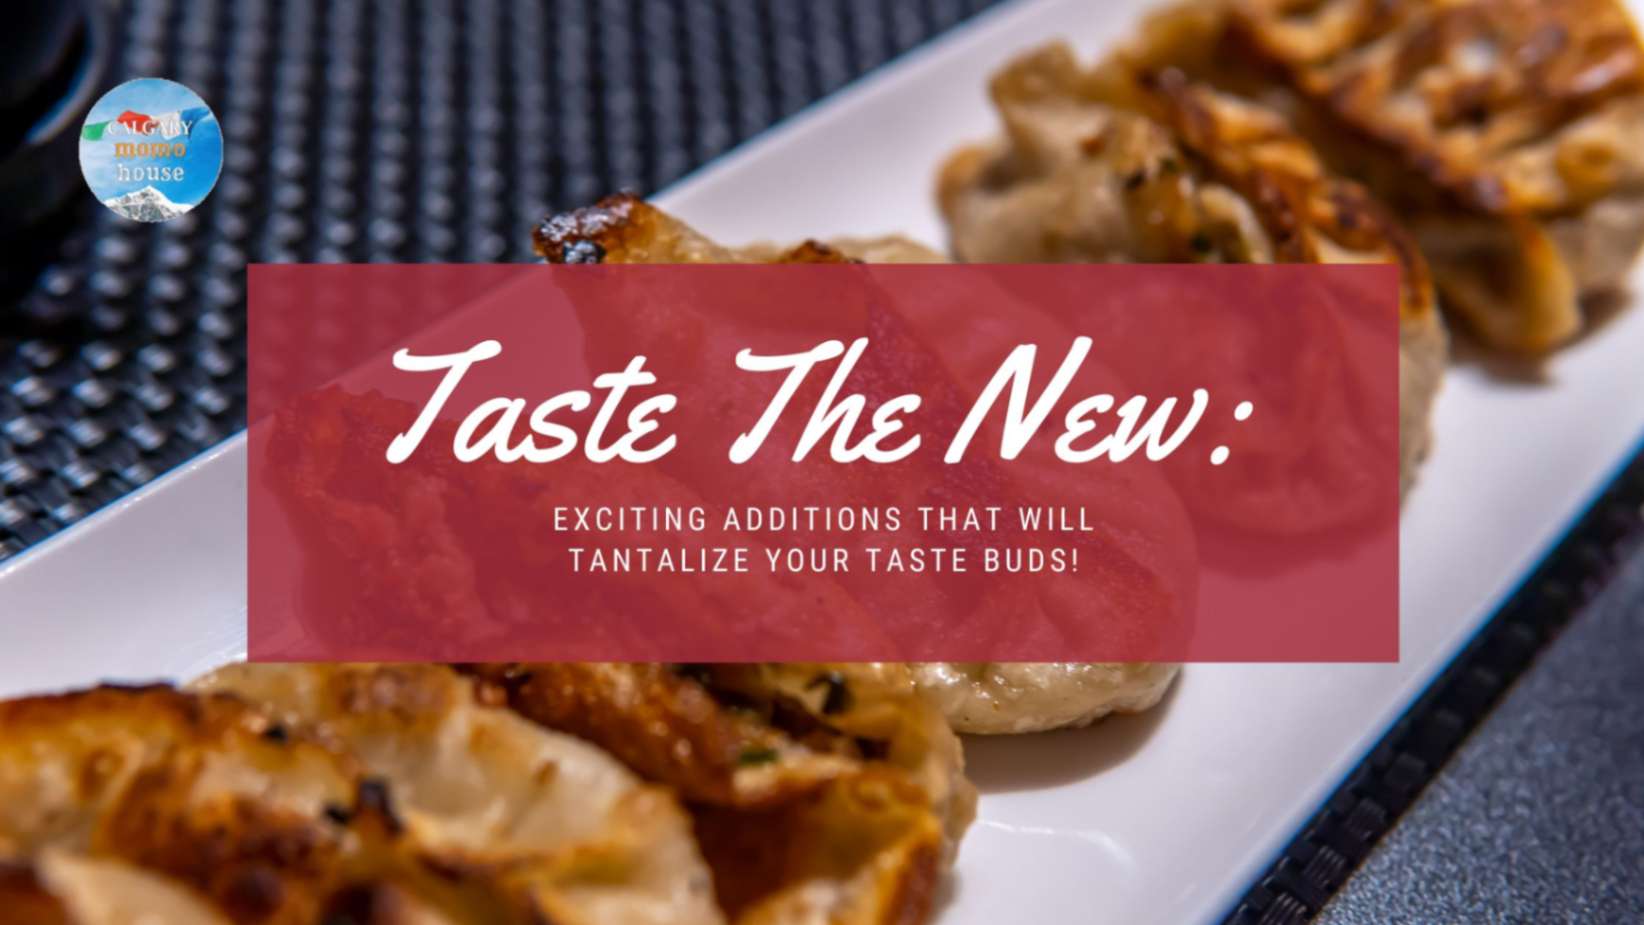 Taste The New: Exciting Additions That Will Tantalize Your Taste Buds!